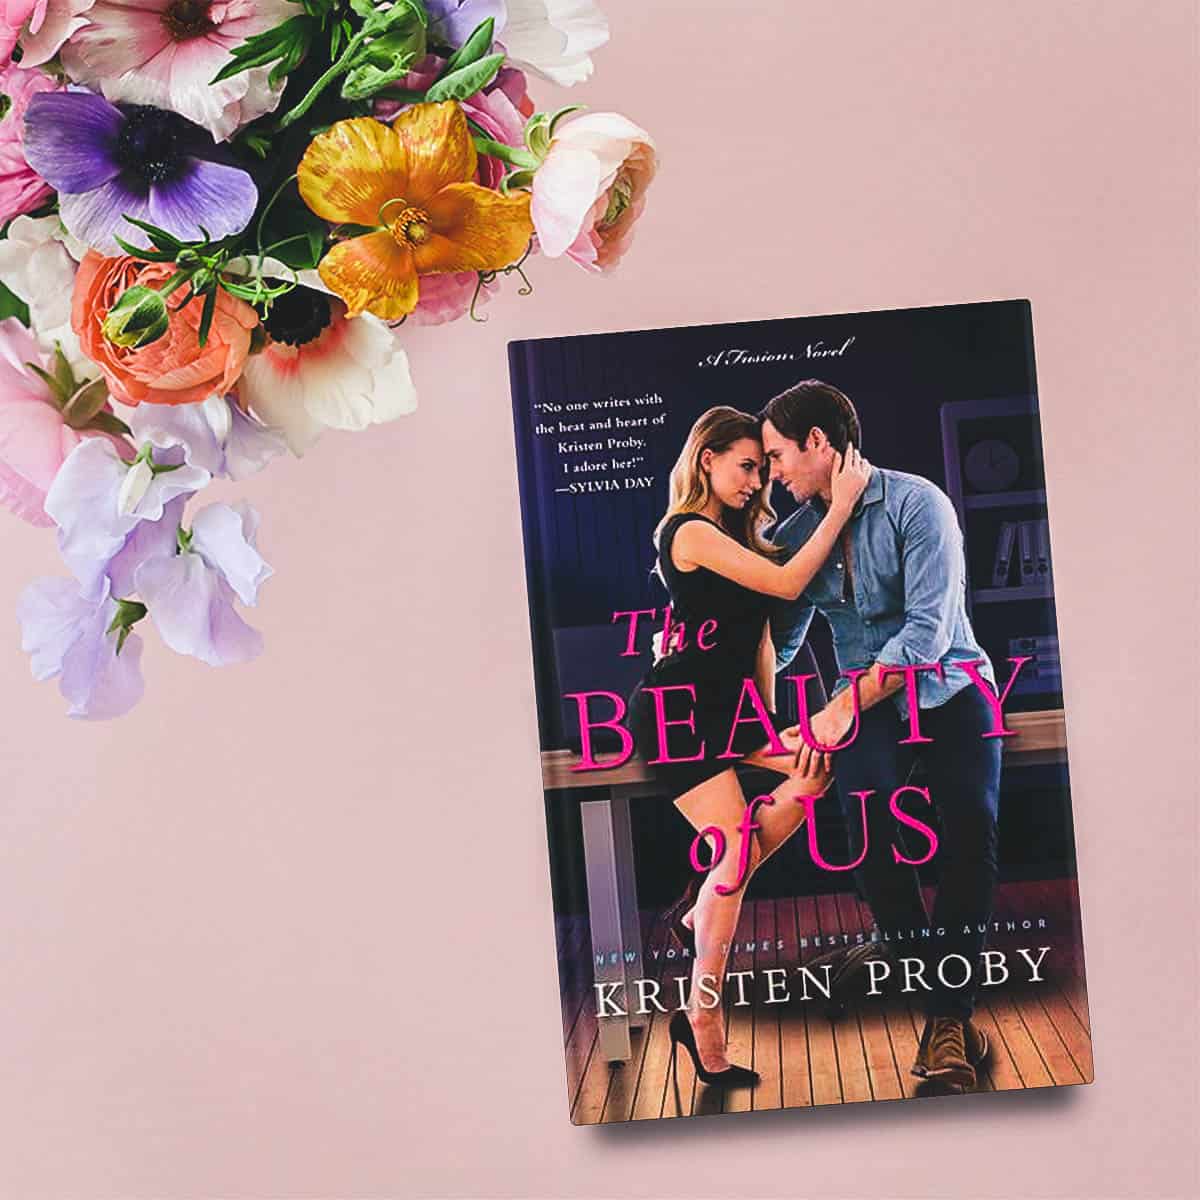 If you’re looking for a romance that’s low on angst but high on steam, look no further than The Beauty of Us by Kristen Proby, the 4th book in the Fusion series